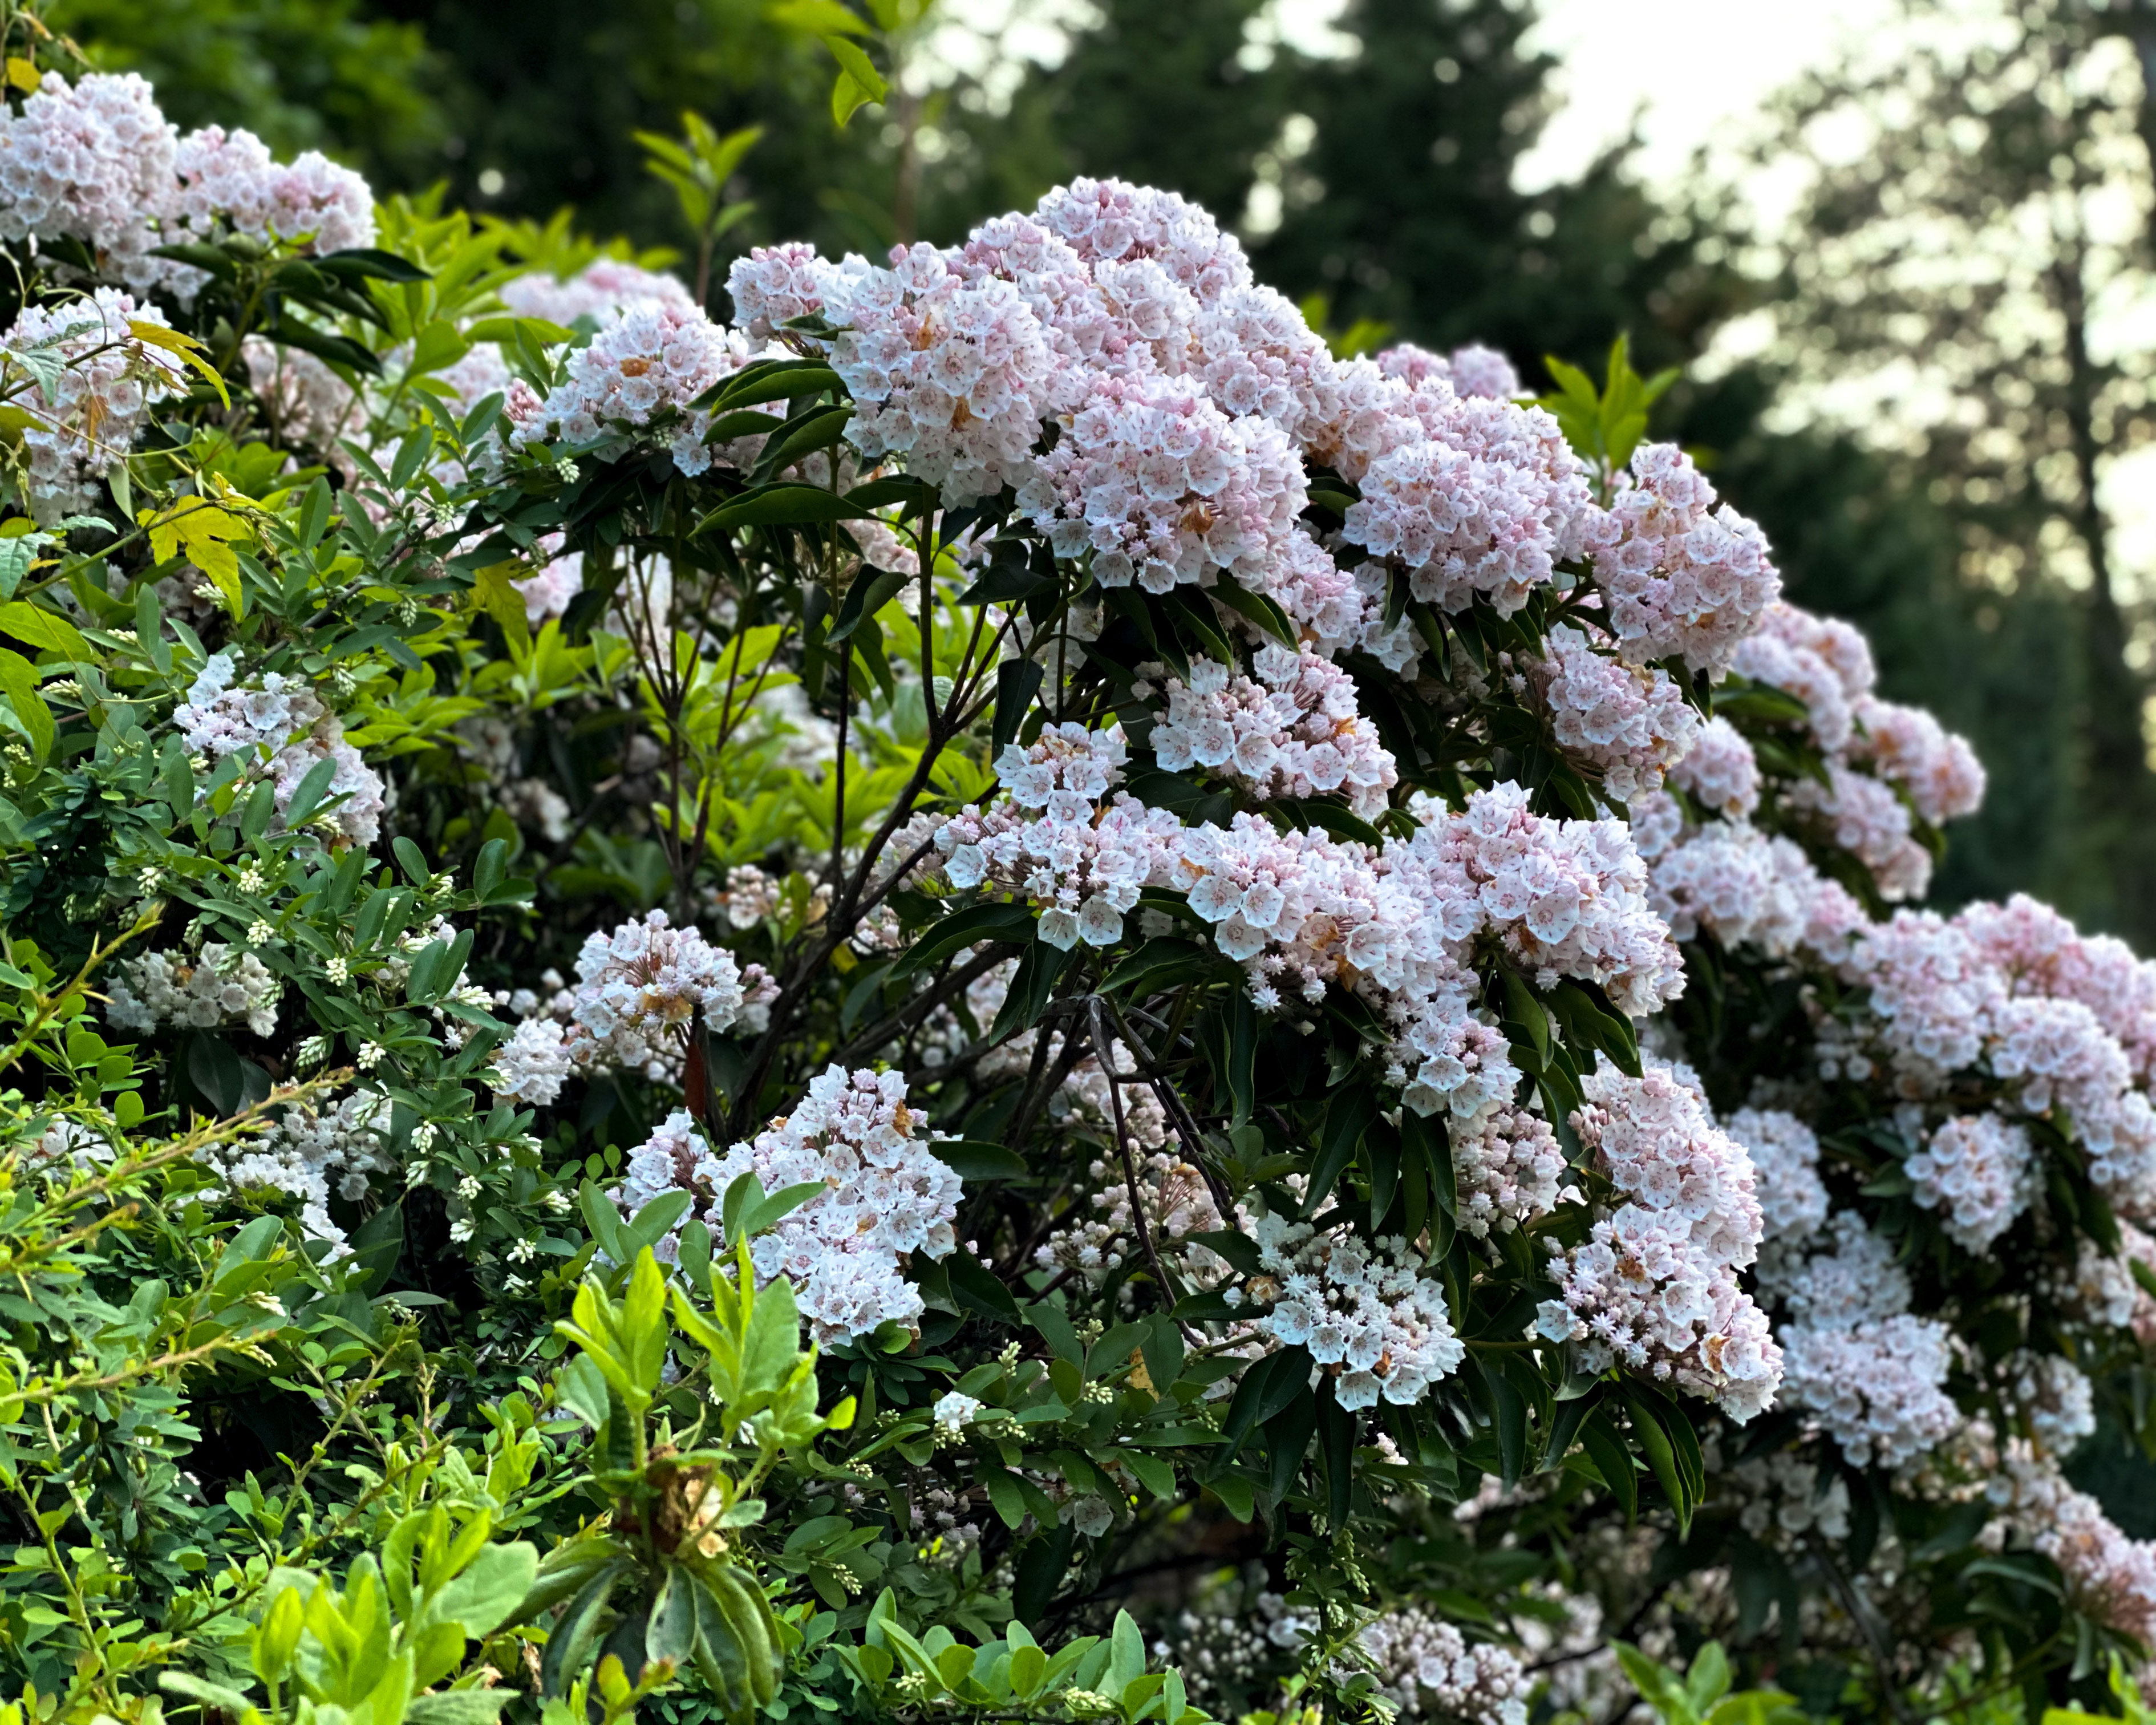 Best shrubs for privacy the top 20 varieties for your yard ...